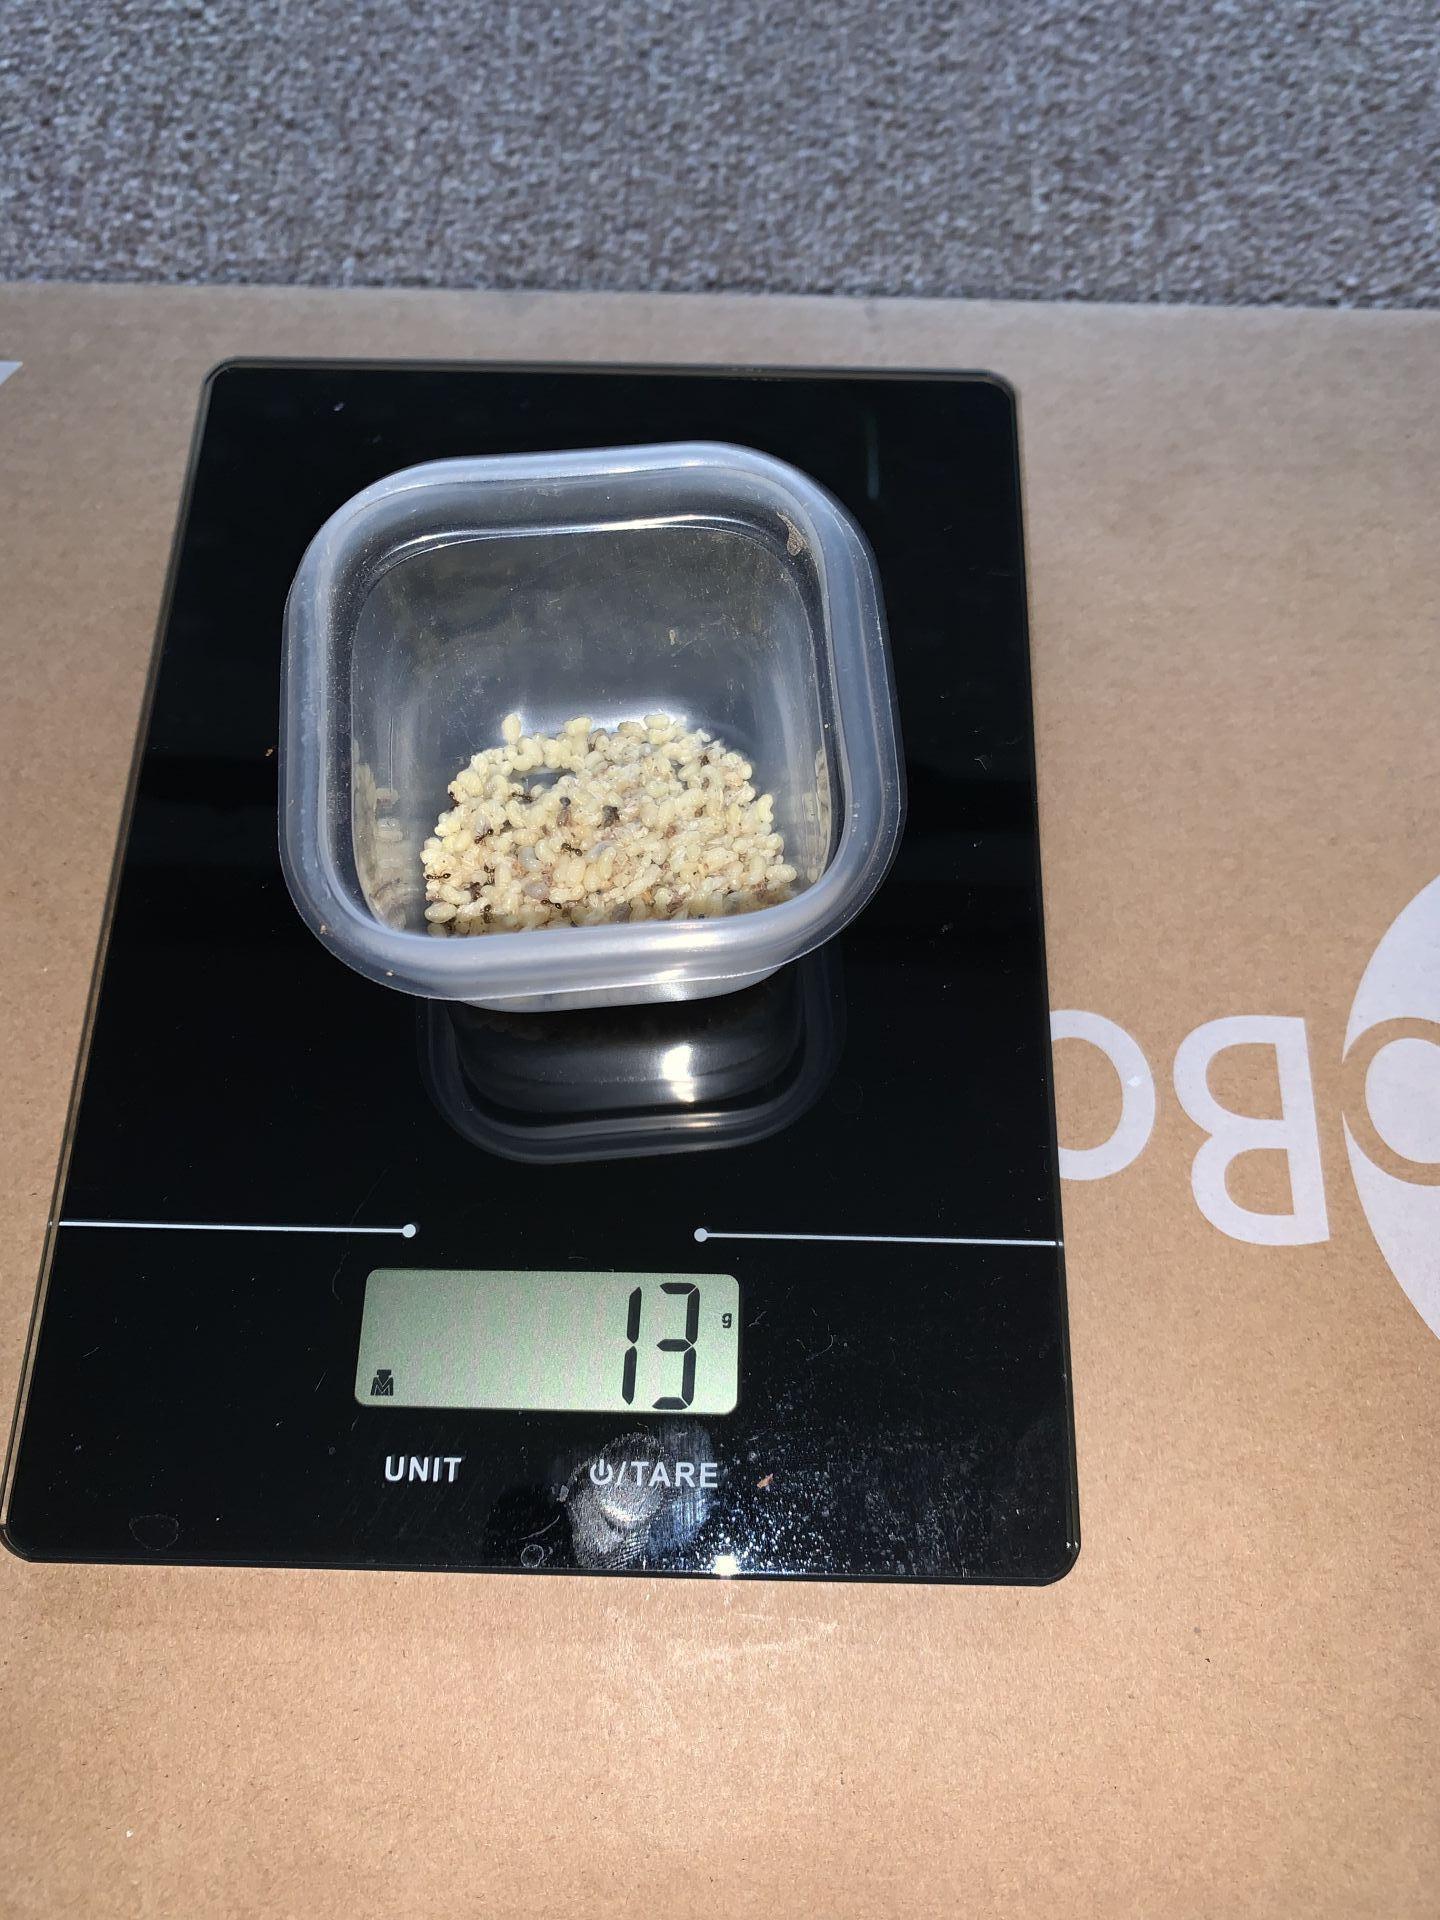 Brood on scale for weighing